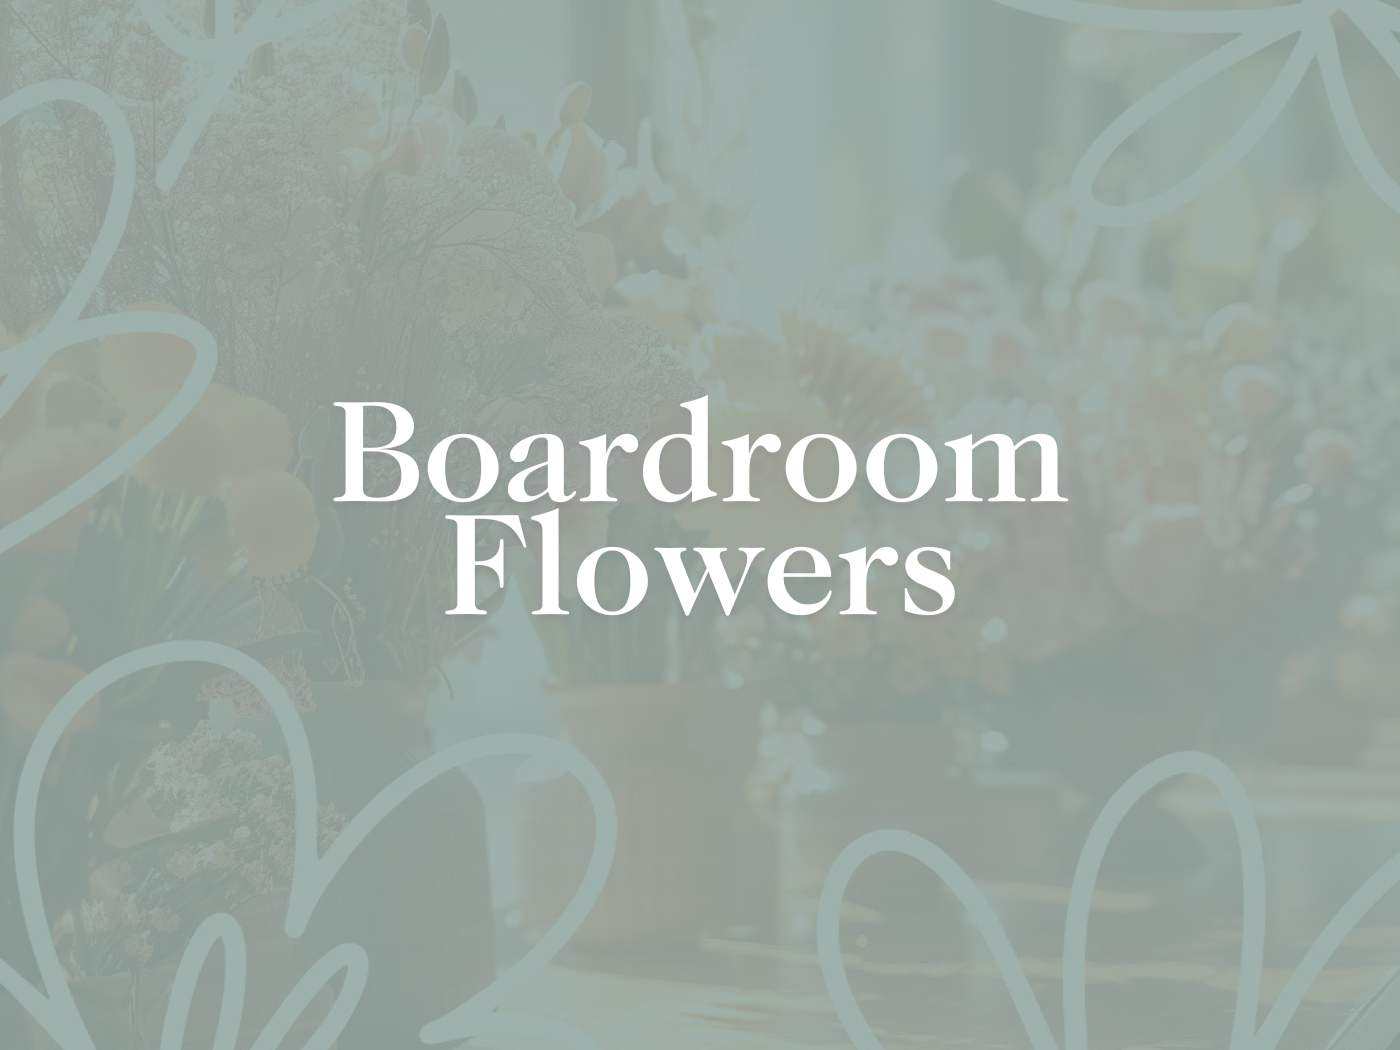 Elegant and sophisticated boardroom flowers arrangement, enhancing corporate ambience, from Fabulous Flowers and Gifts.